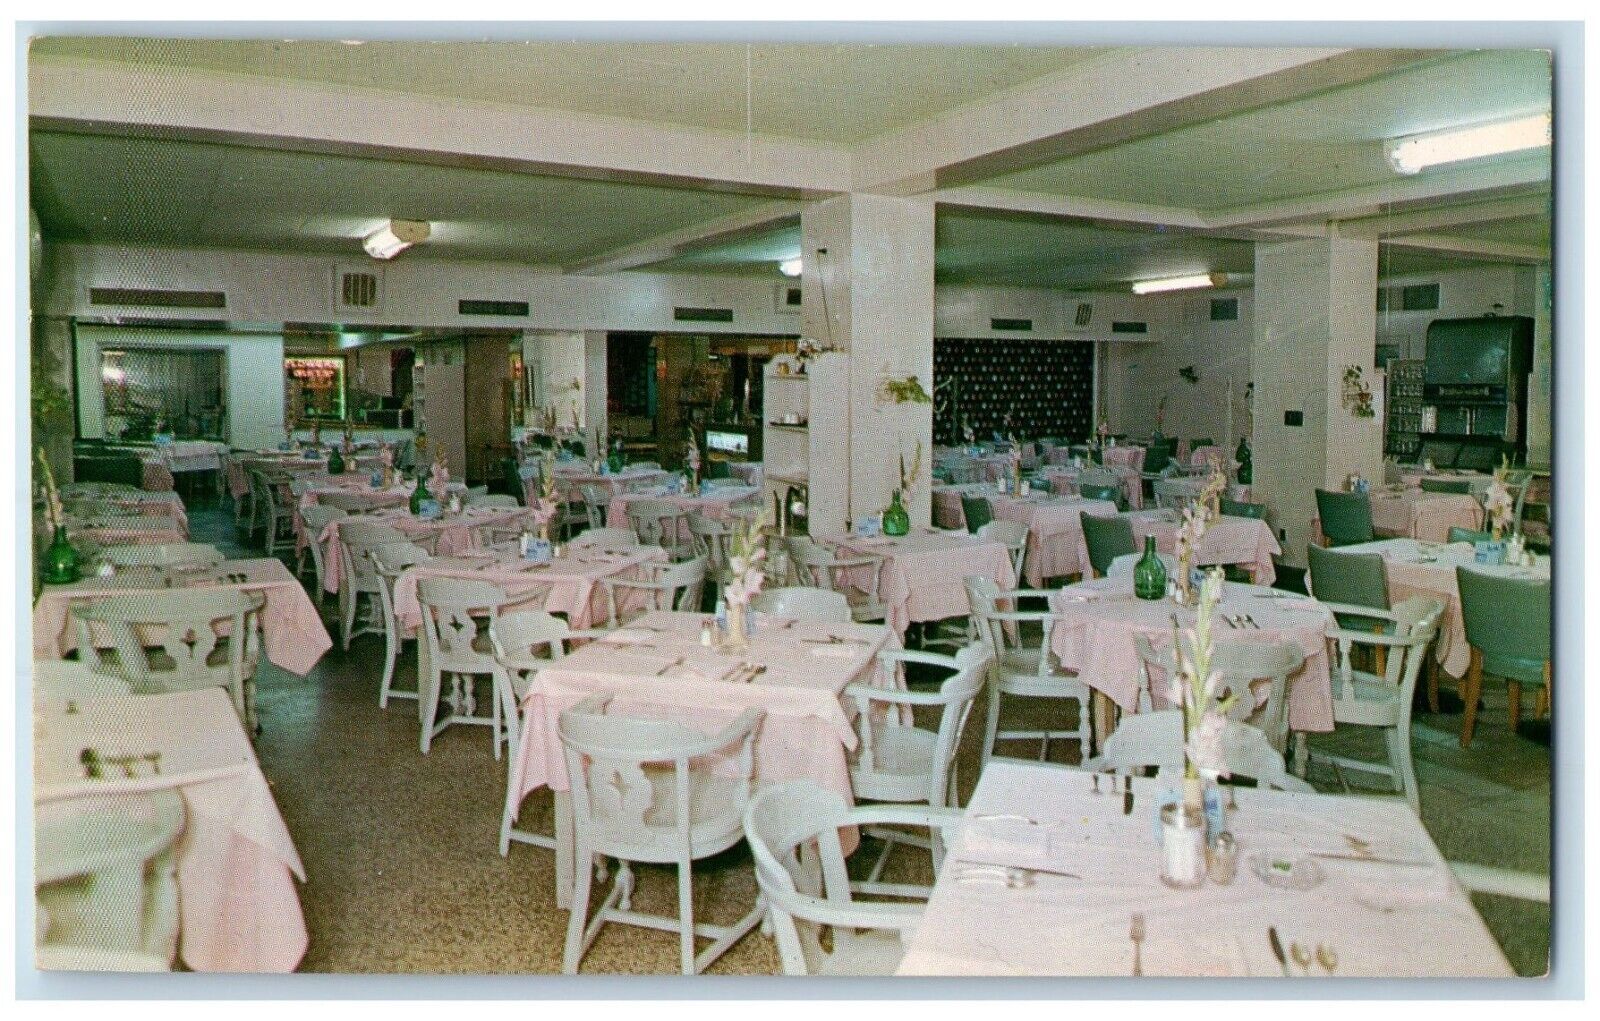 1960 Hotel King Cotton Front Street Dining Restaurant Memphis Tennessee Postcard